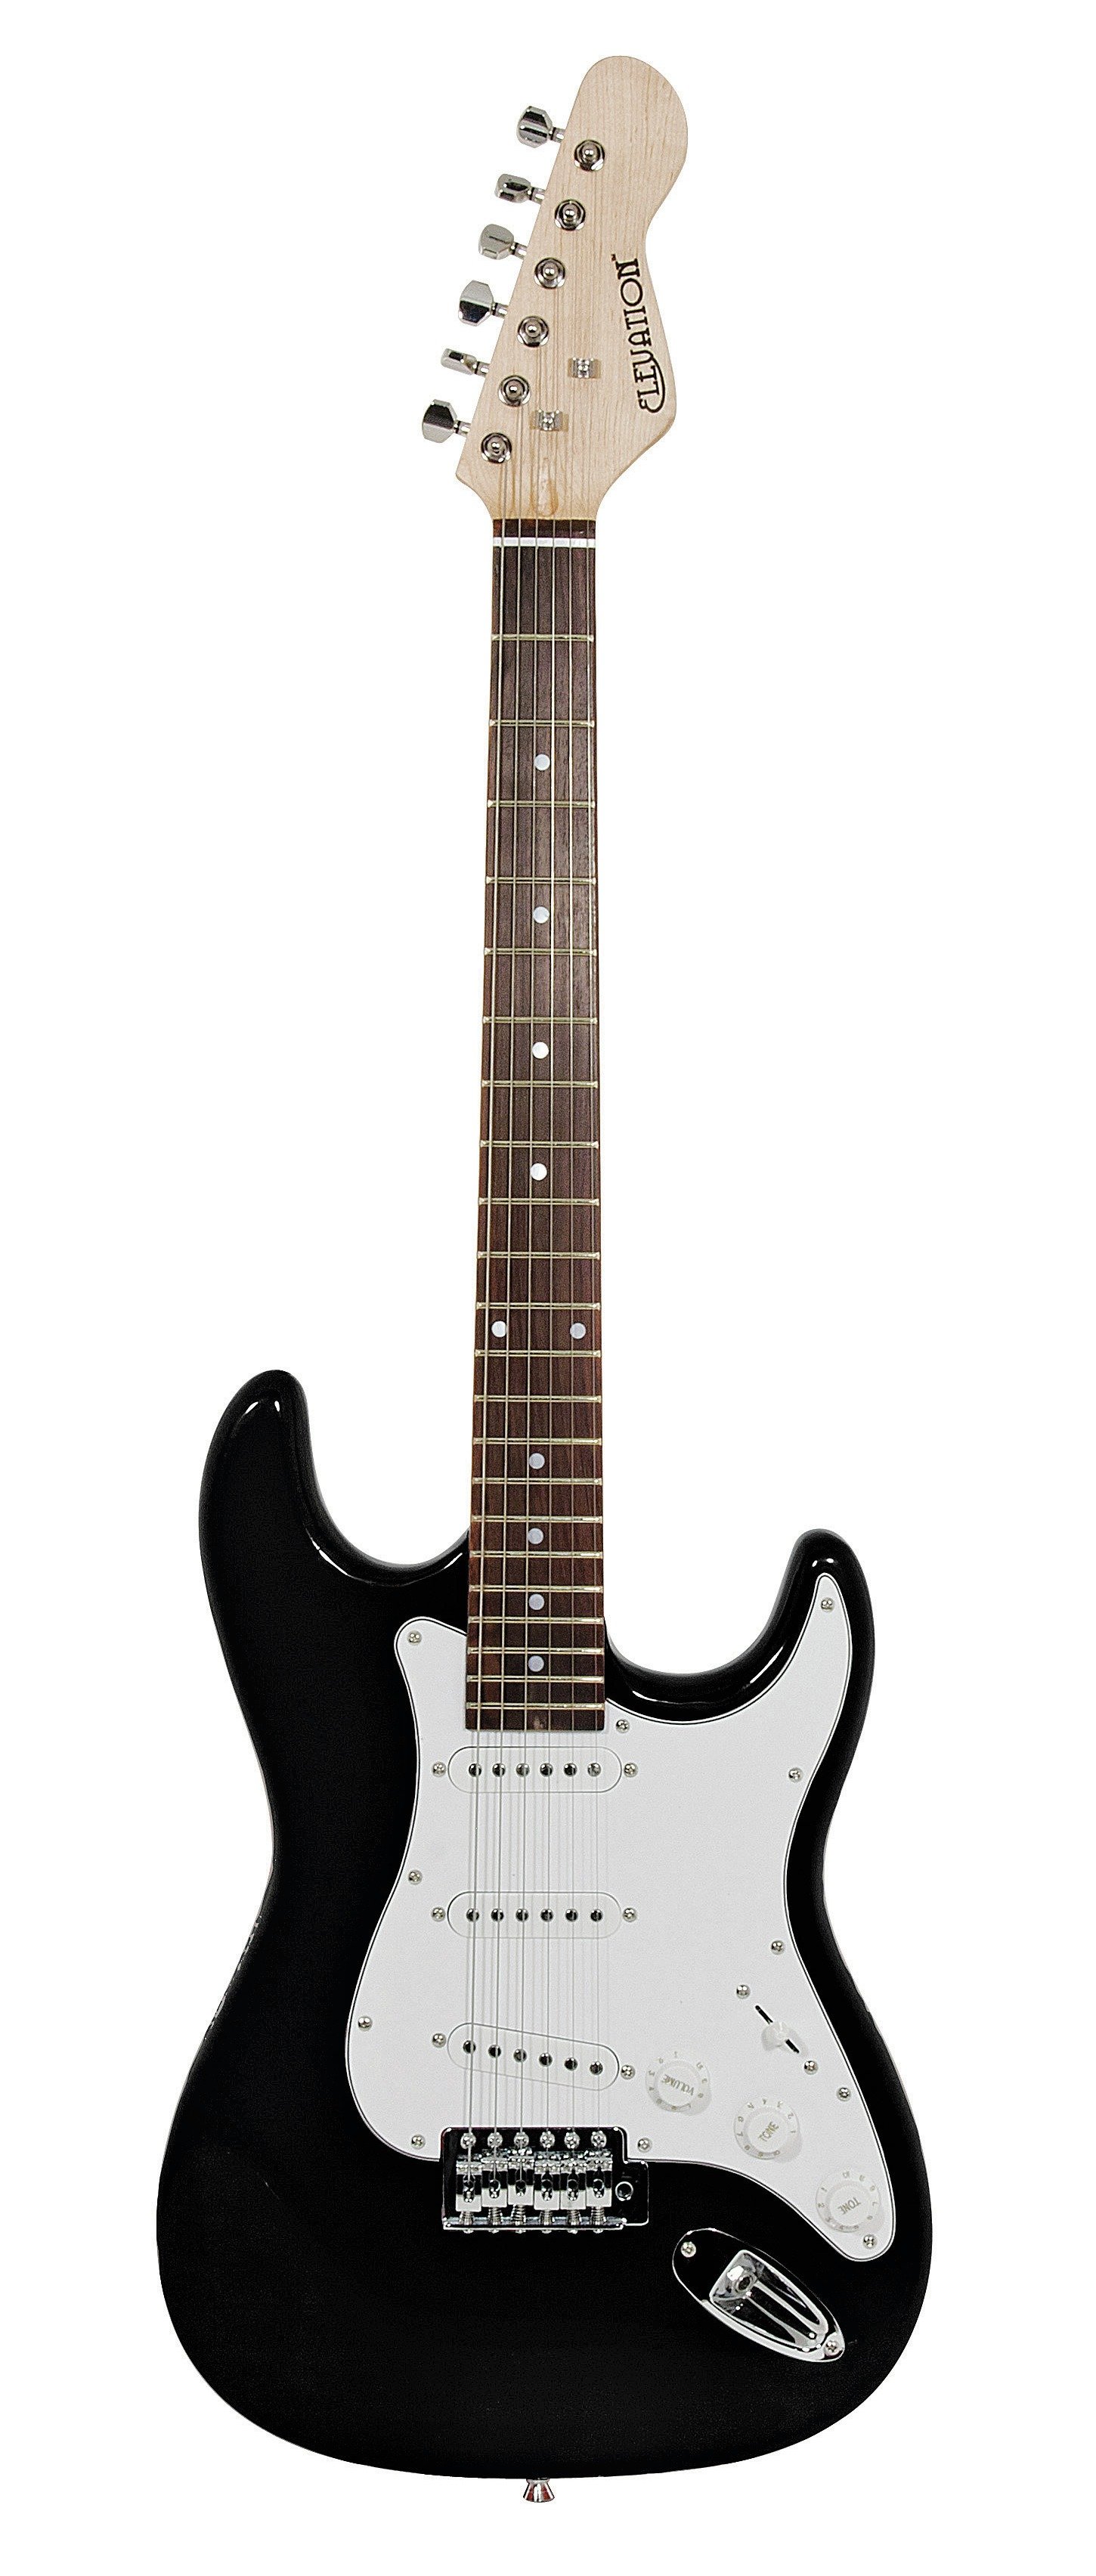 Elevation Full Size Electric Guitar & Accessories review